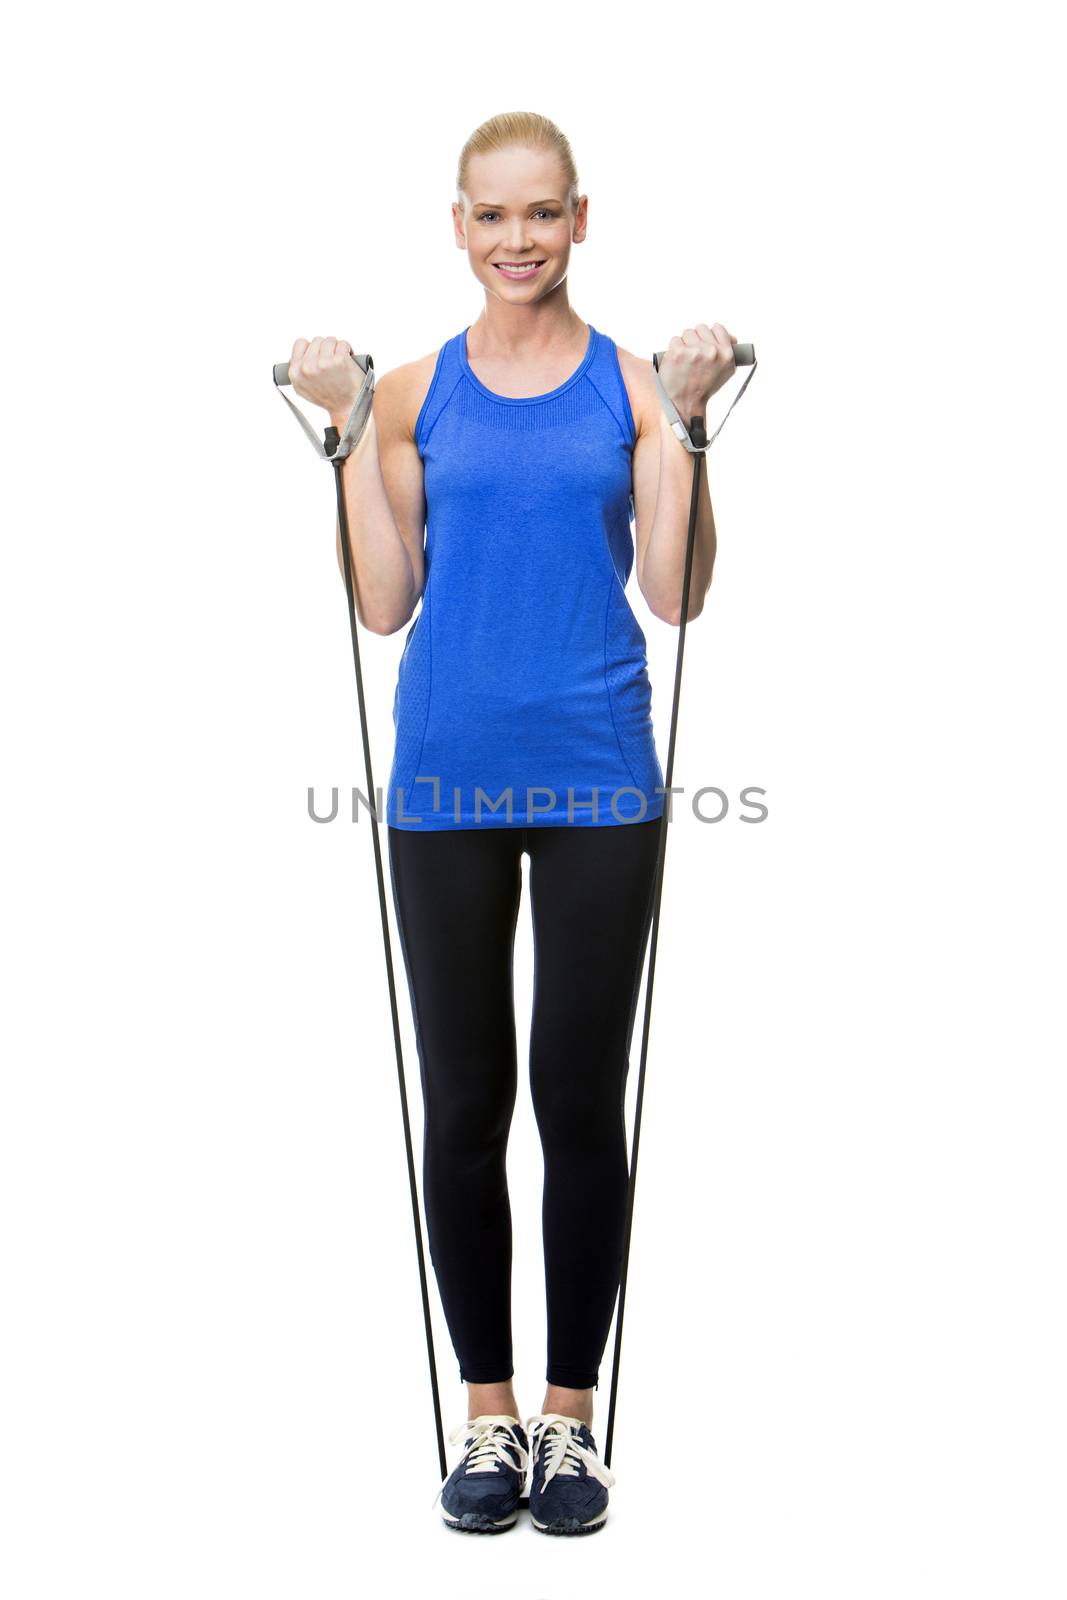 blonde woman wearing fitness clothing exercising with rubber band